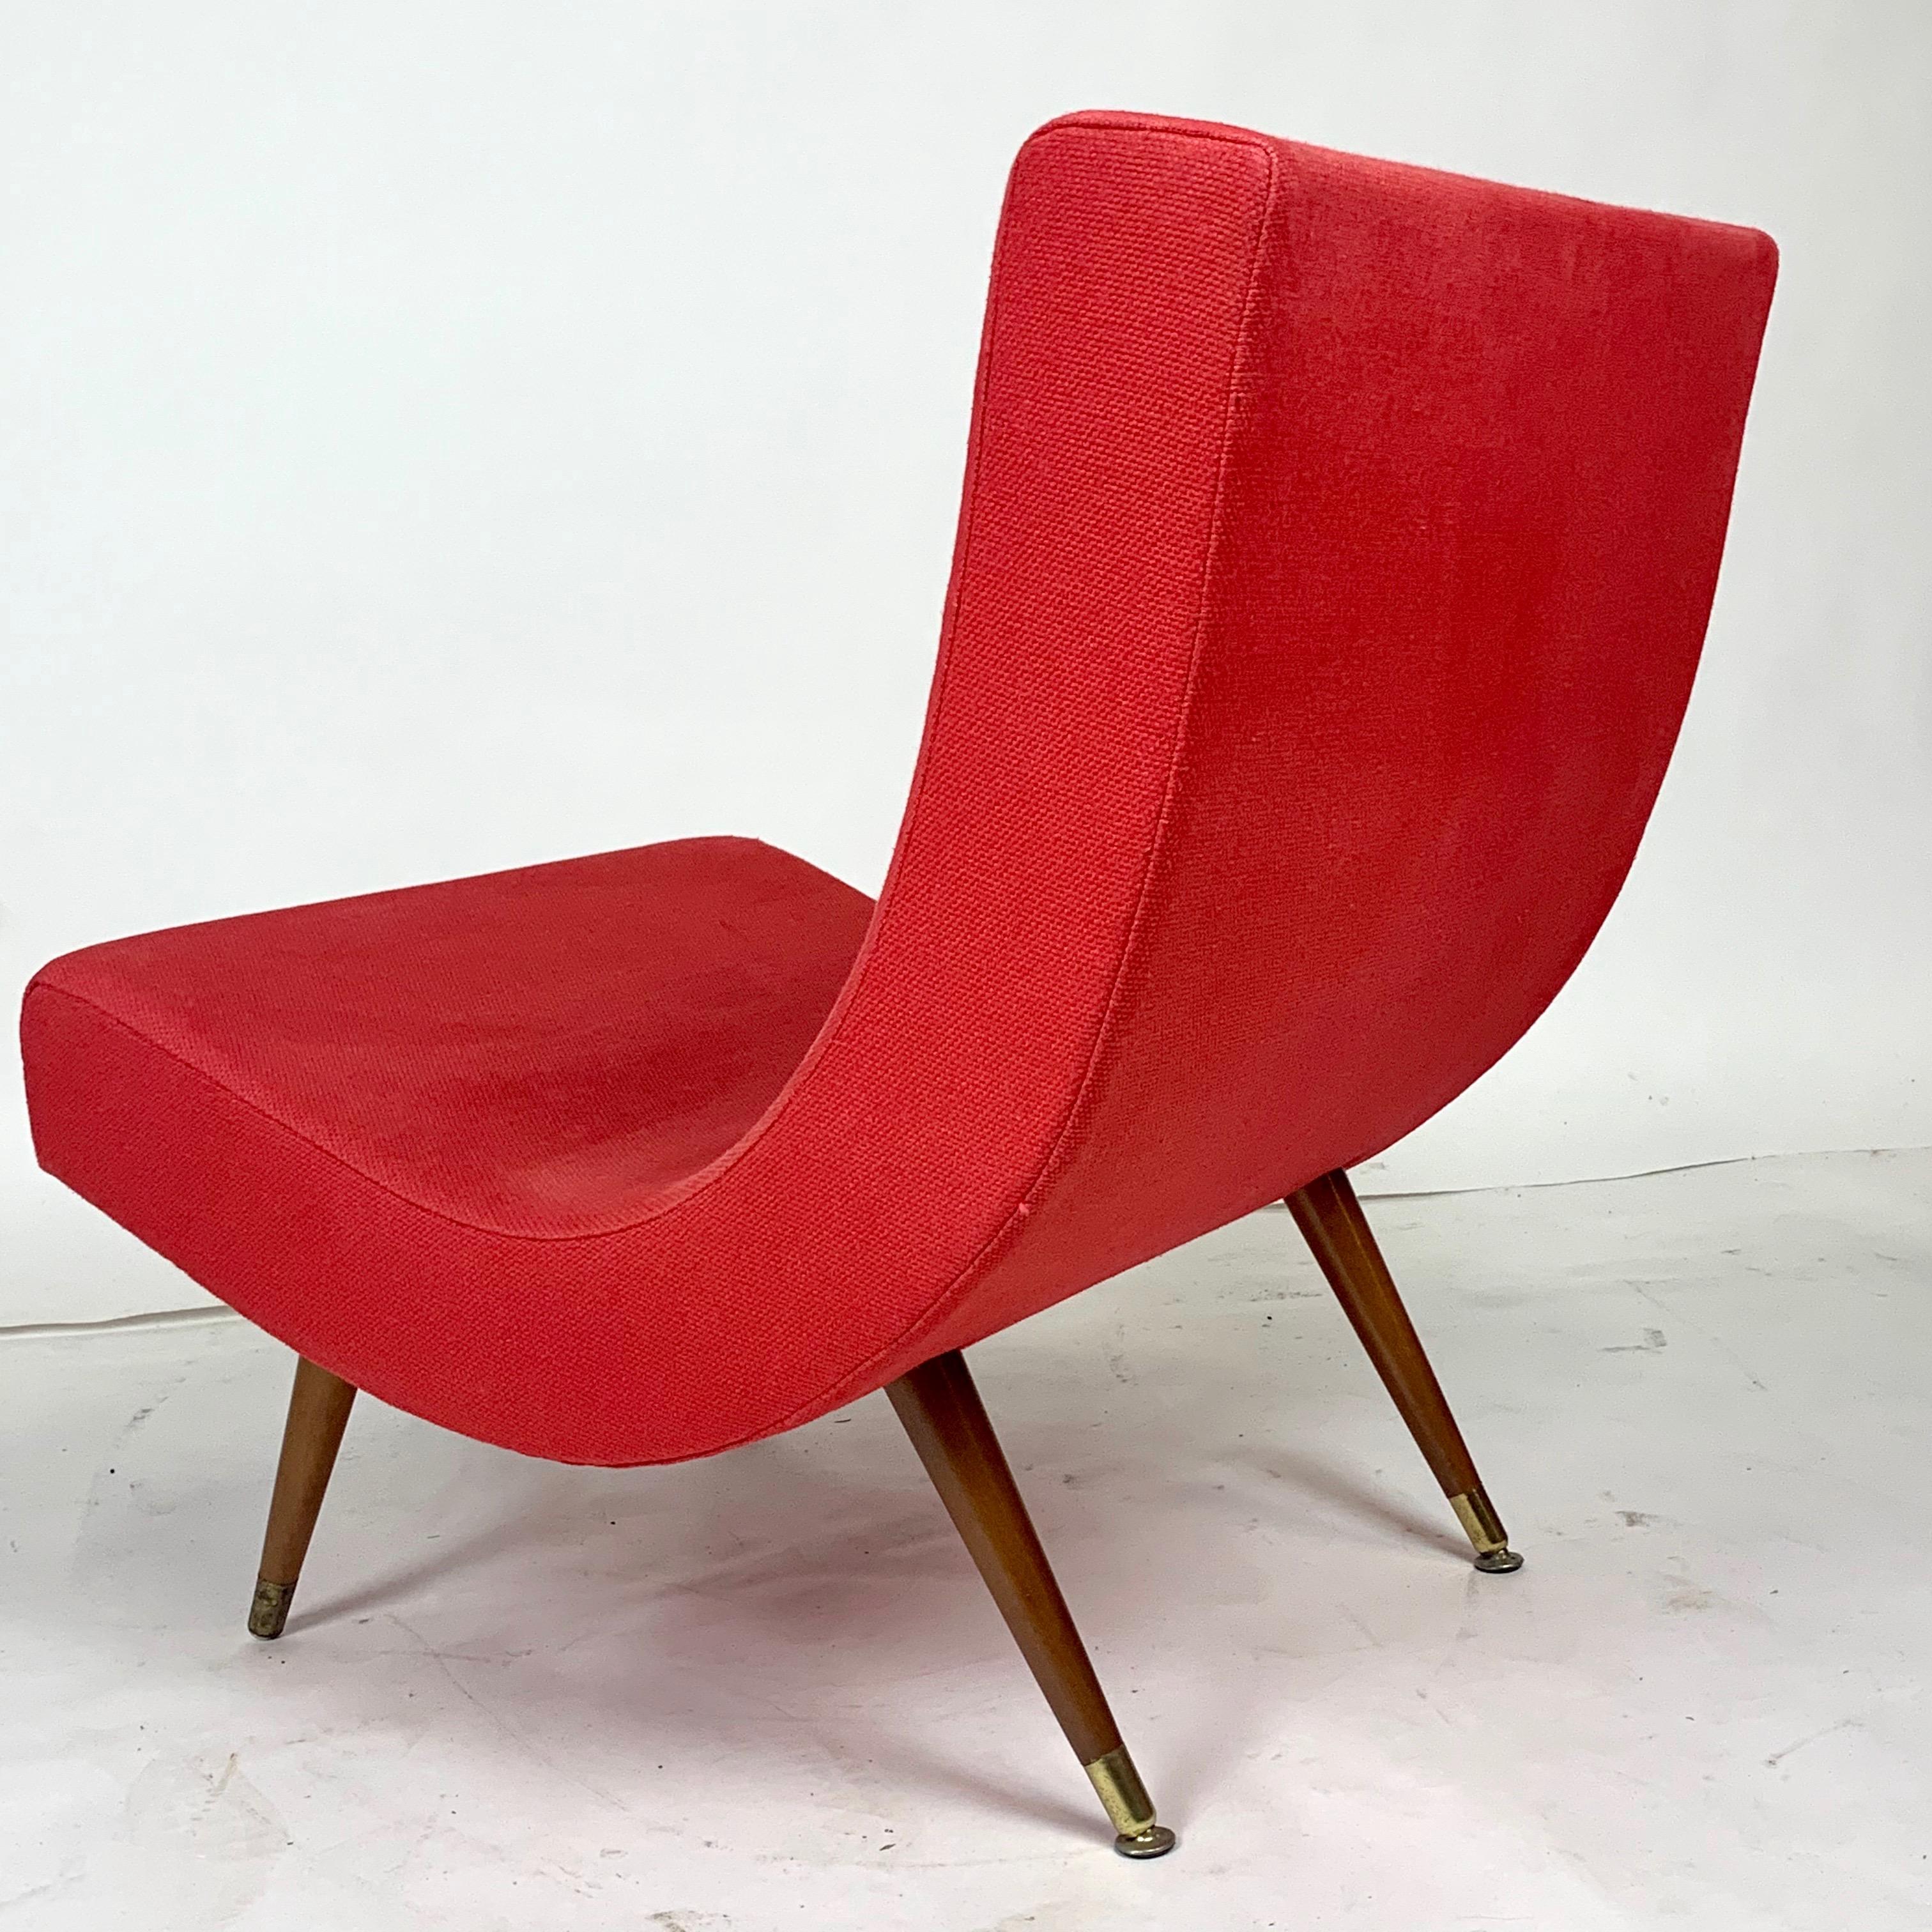 Pair of Adrian Pearsall Attributed Mid-Century Modern Red Scoop Lounge Chairs 2